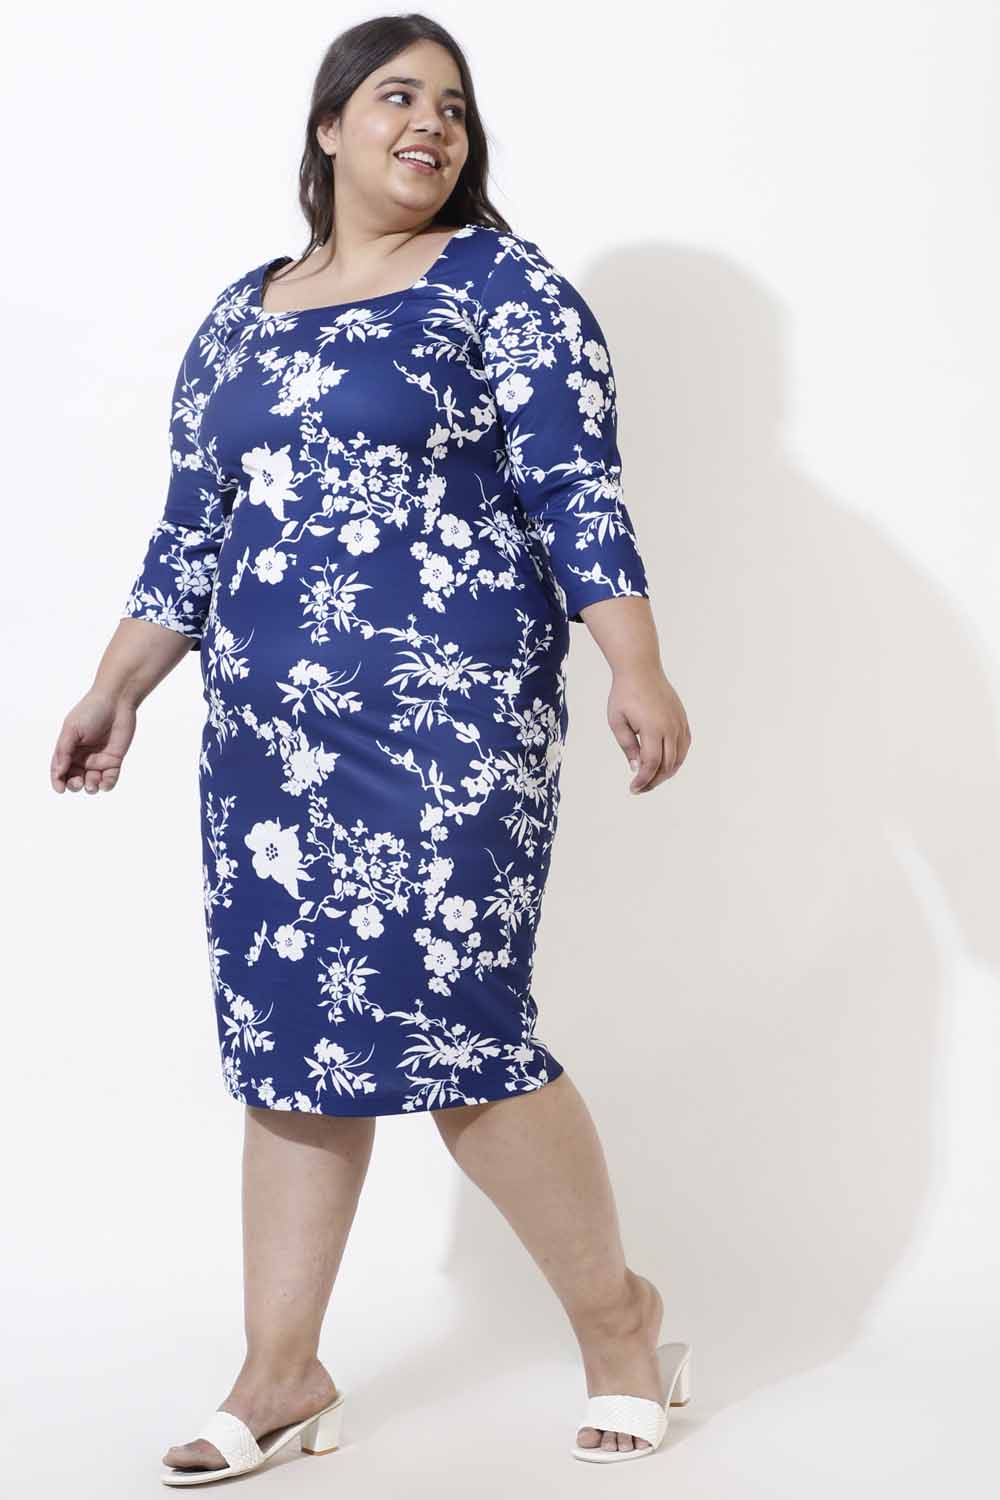 Plus Size Navy Floral Bodycon Dress for Women